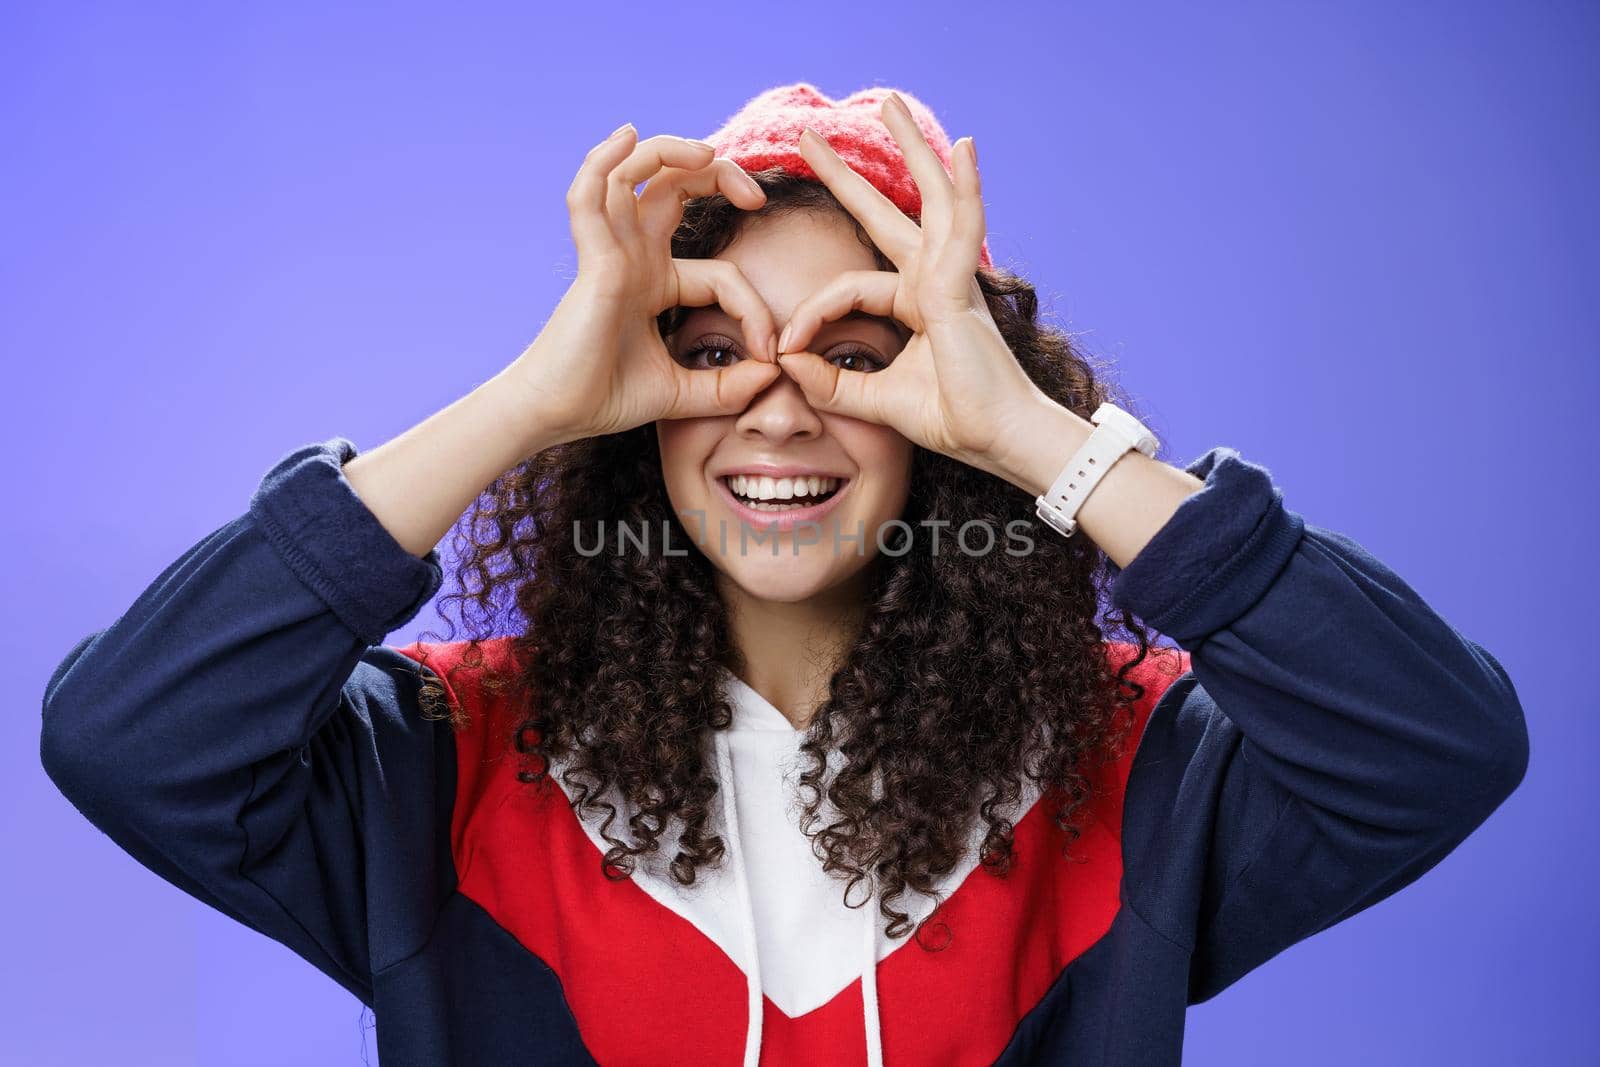 Girl see us as imitating peek with binocular making circles over eyes and looking through it joyful and excited, having fun fooling around posing happy and cute over blue background in outdoor outfit.